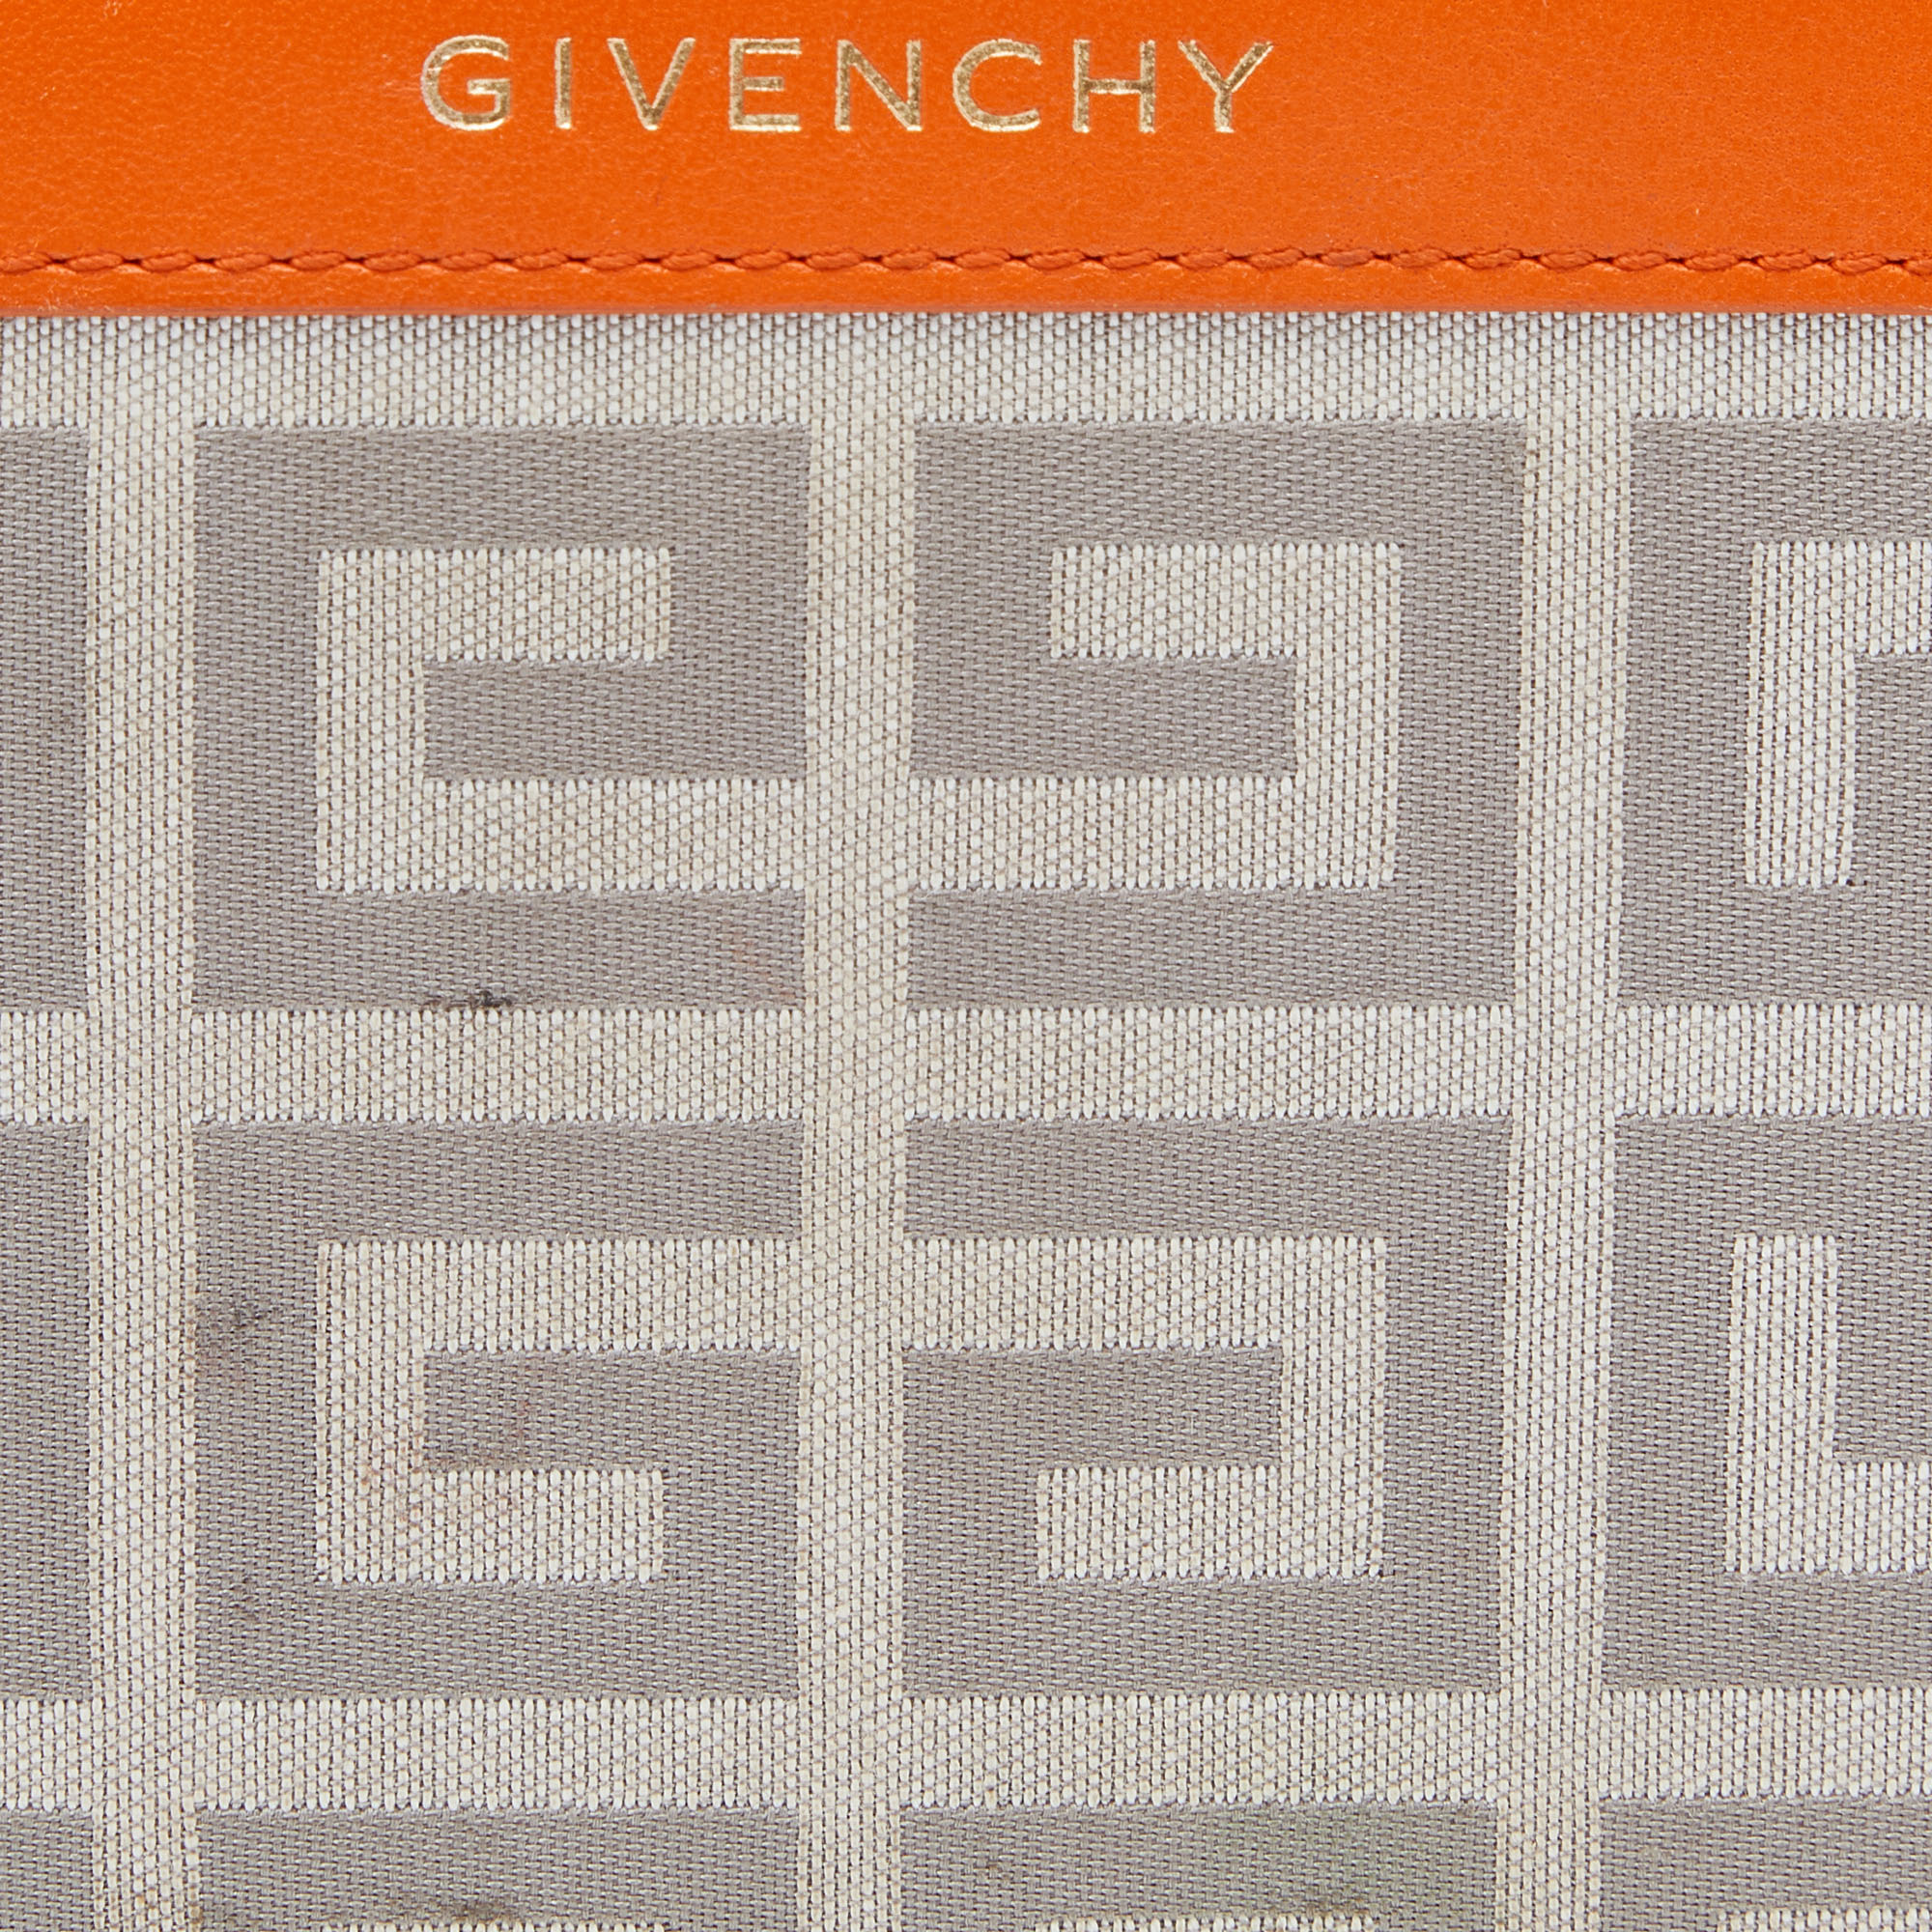 Givenchy Orange/Grey Signature Canvas And Leather Wallet